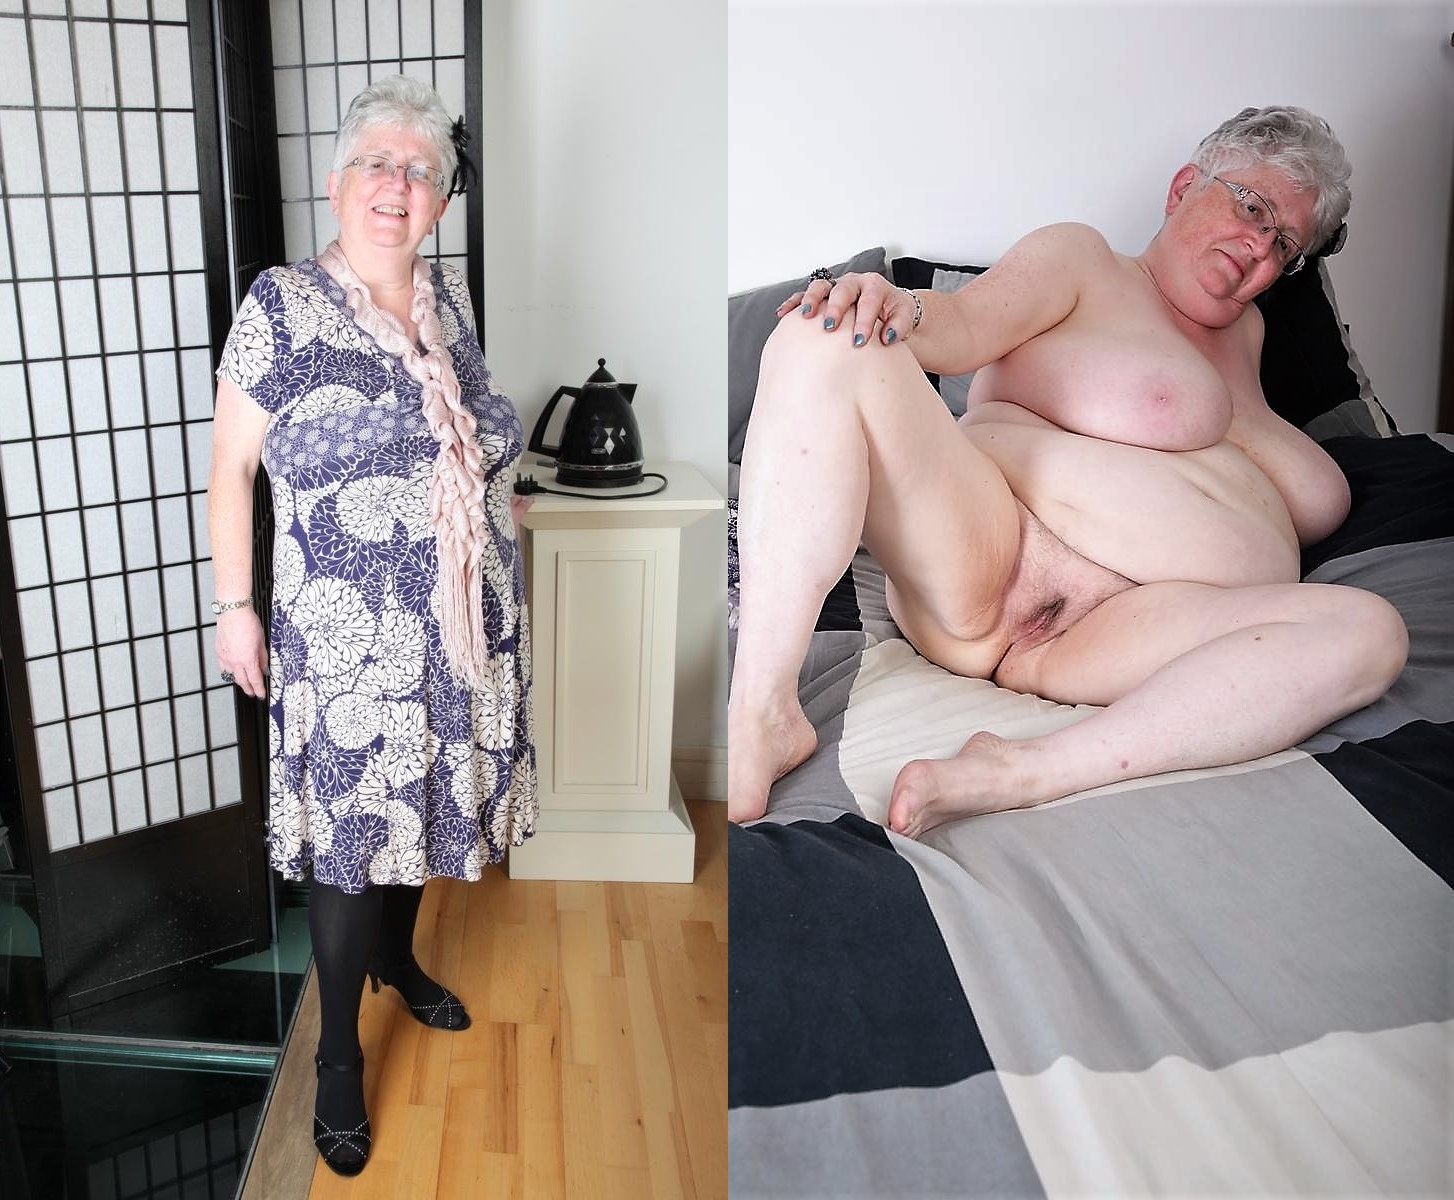 Xxx pictures of granny dressed undressed pic